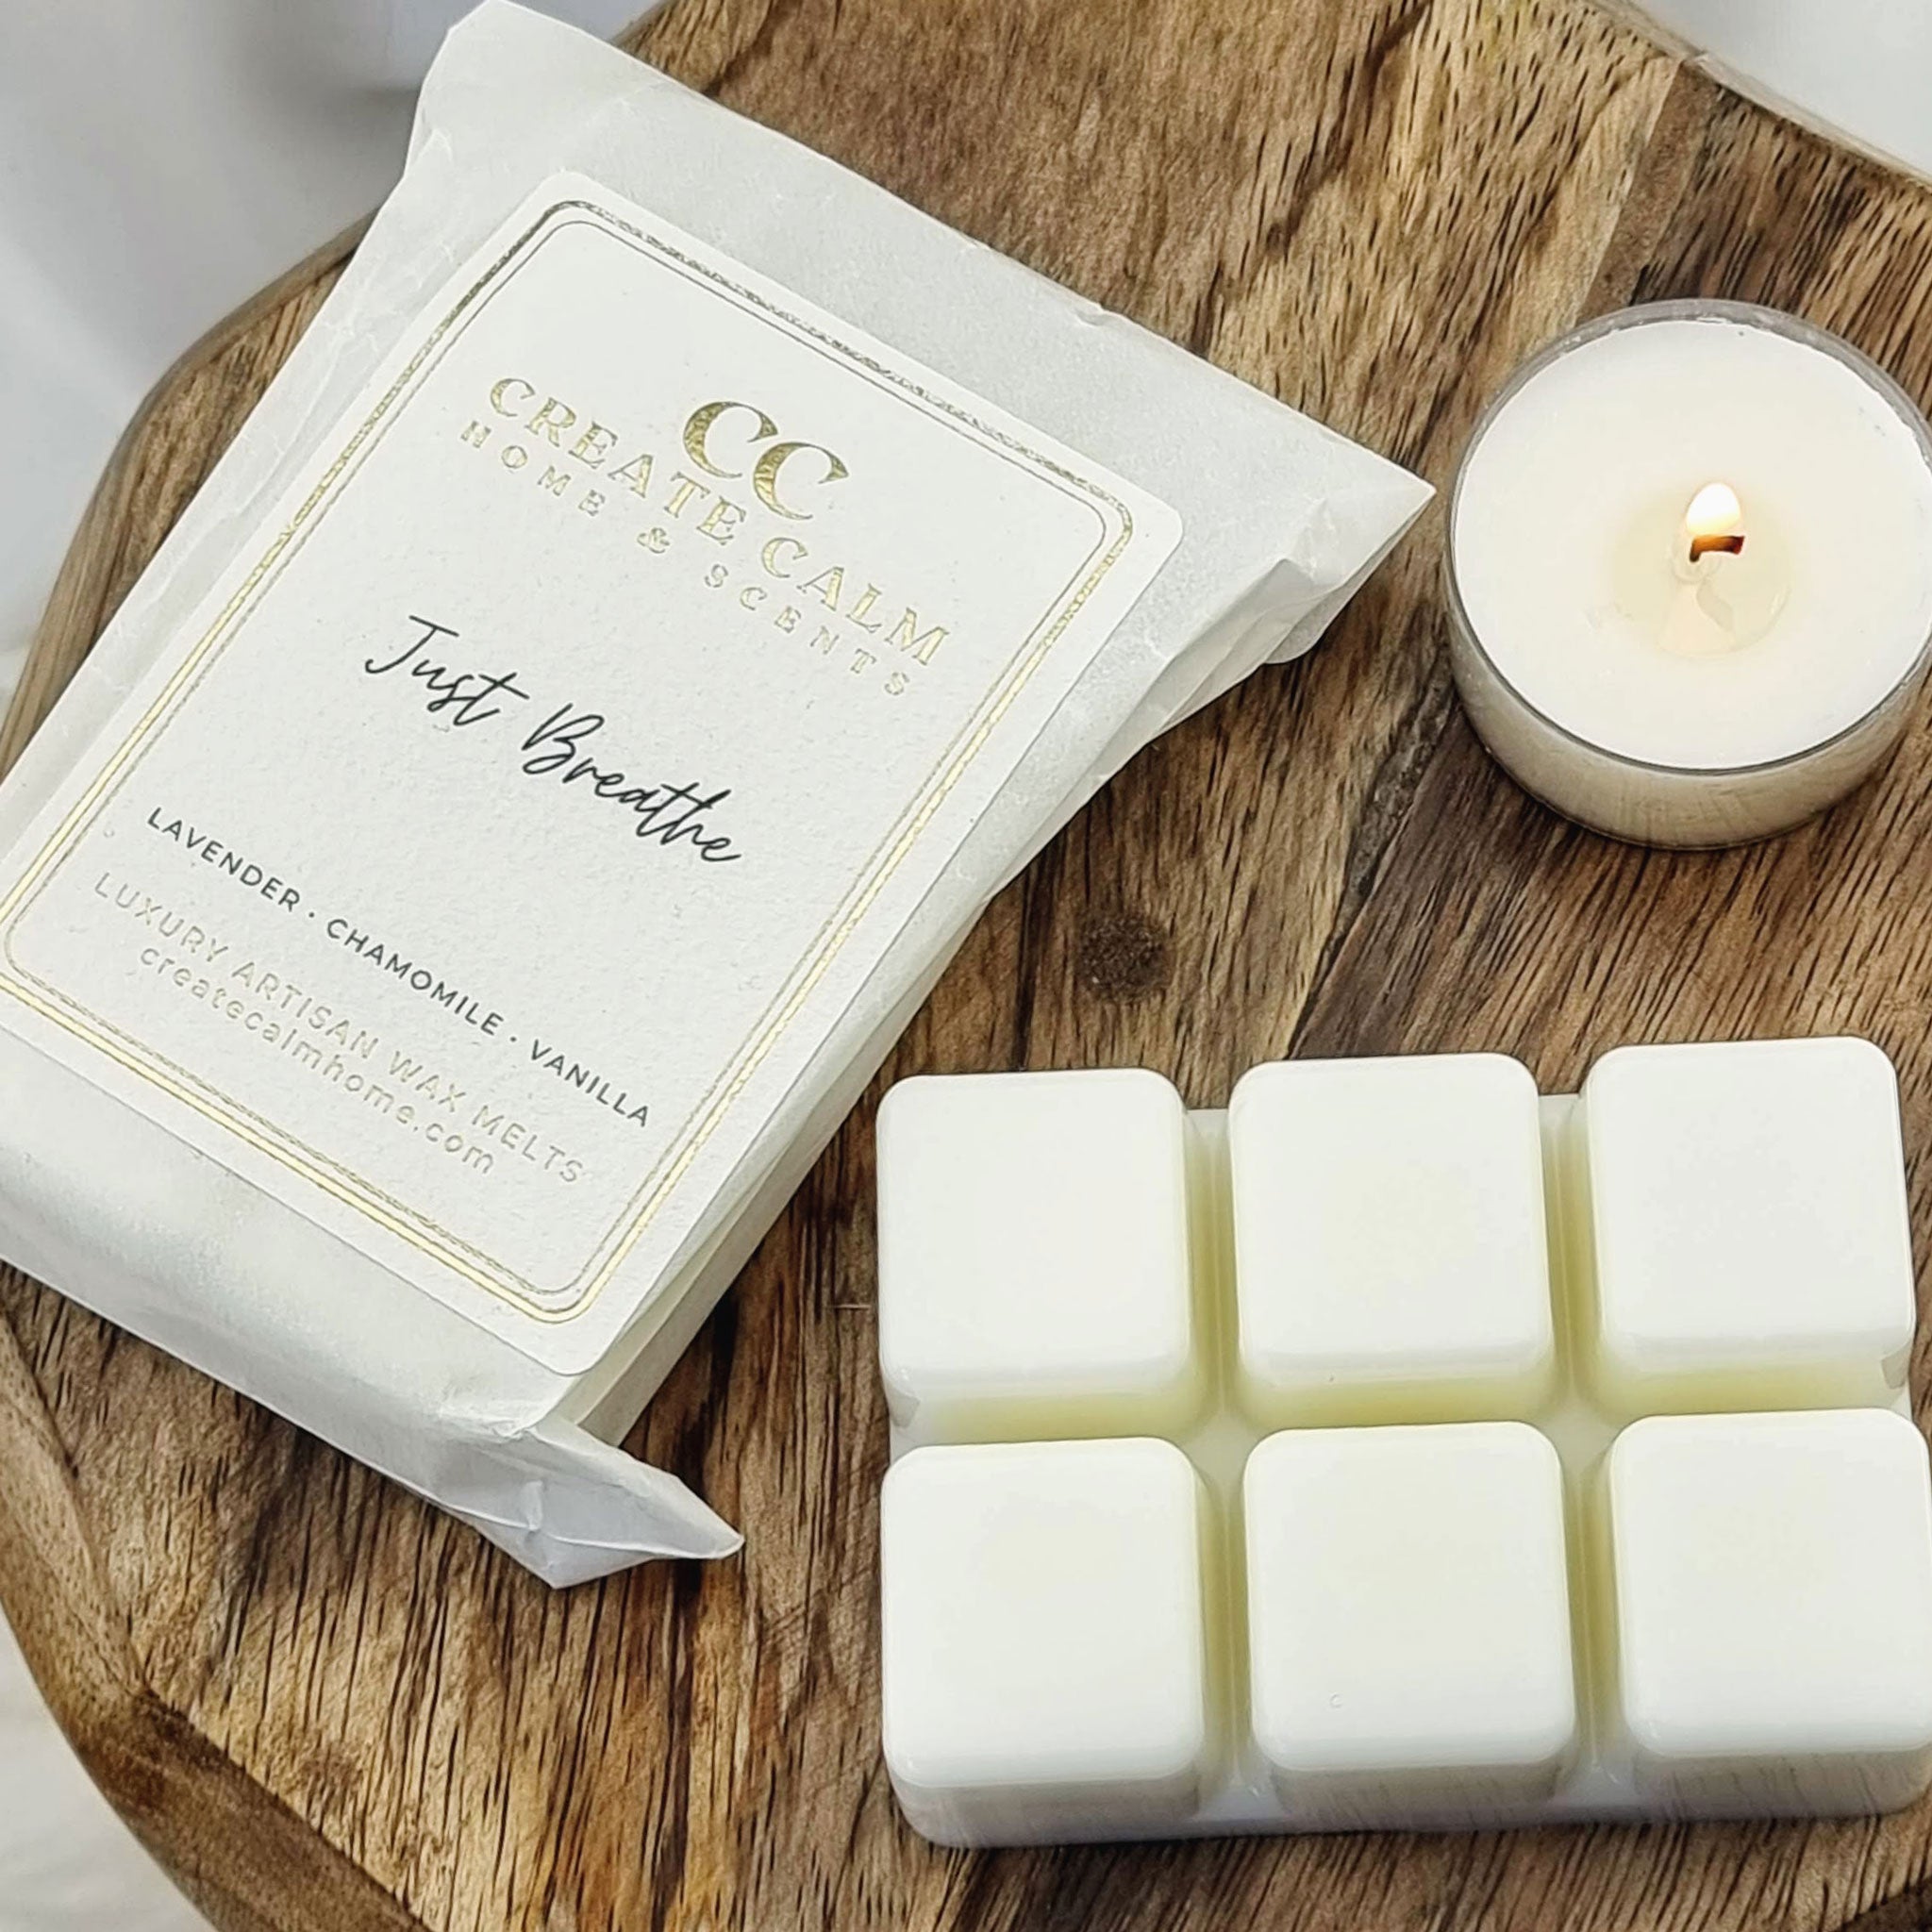 Rise & Grind Luxury Wax Melts - Highly Scented